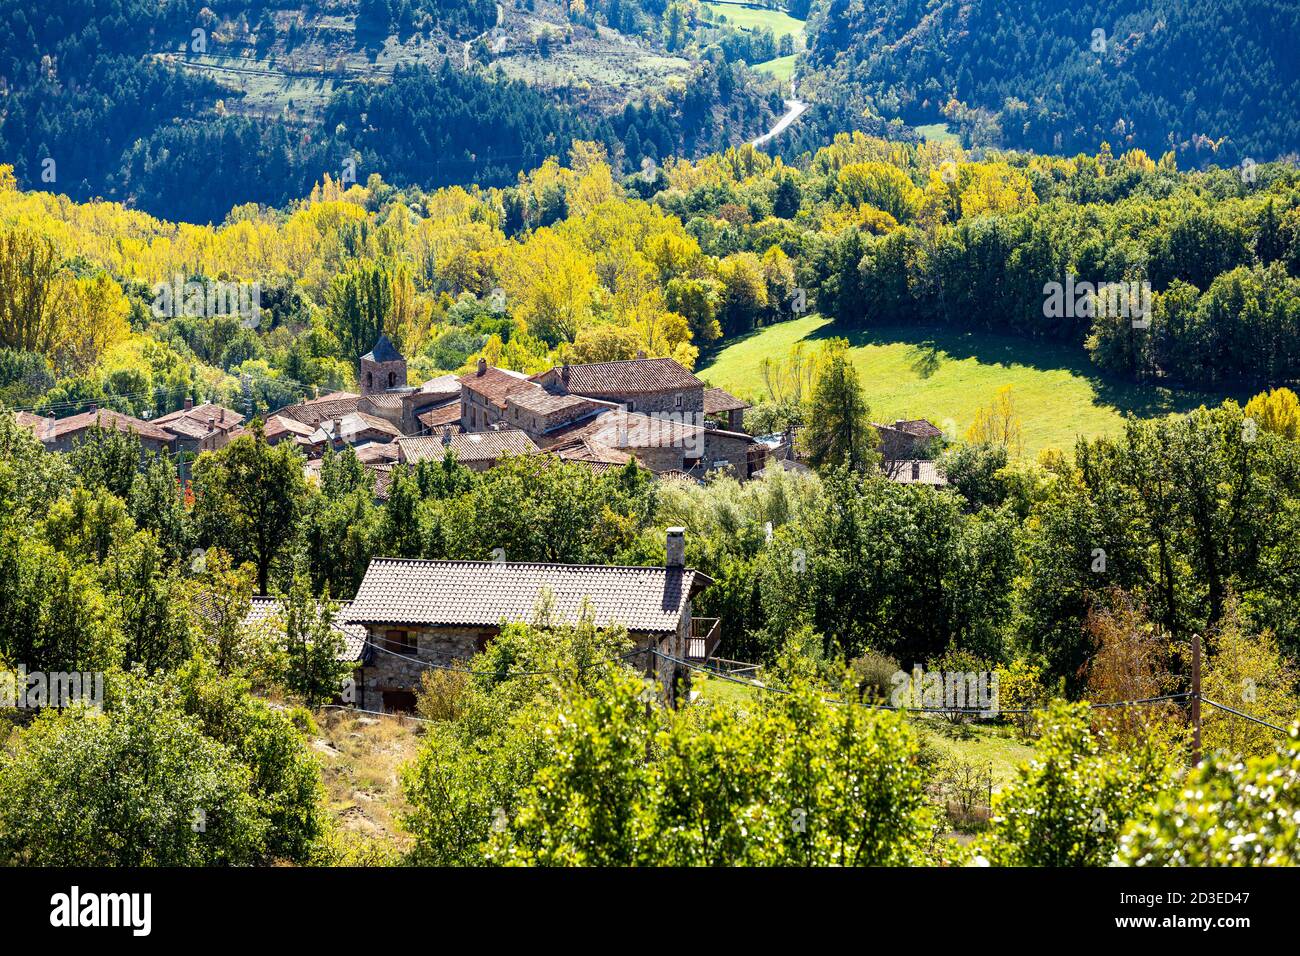 The village of Travesseres, Cerdanya. Stock Photo